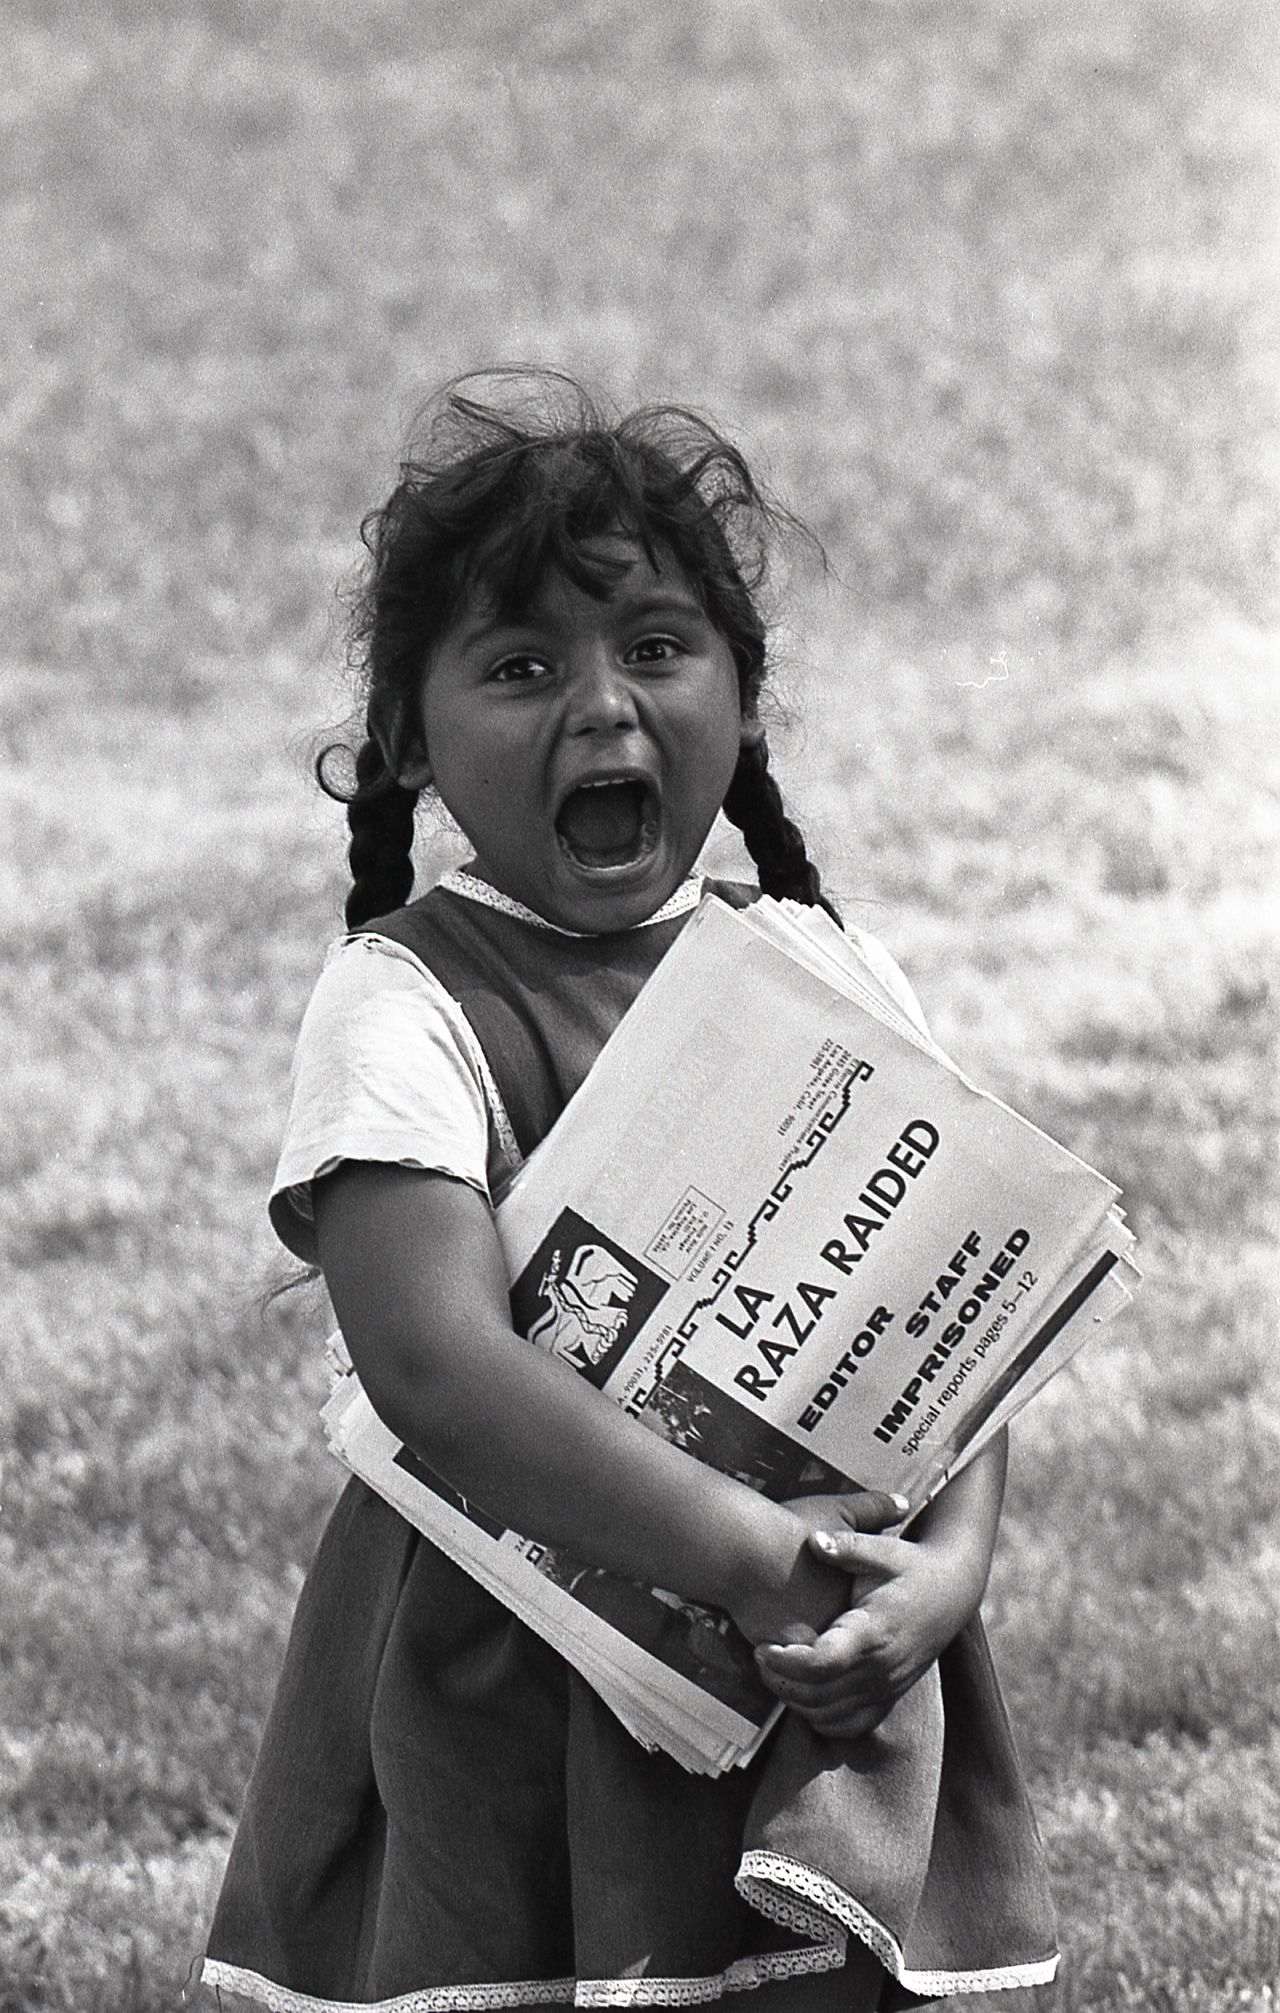 A little girl hands out copies of La Raza at the 1968 Poor People's Campaign for economic justice in Washington.